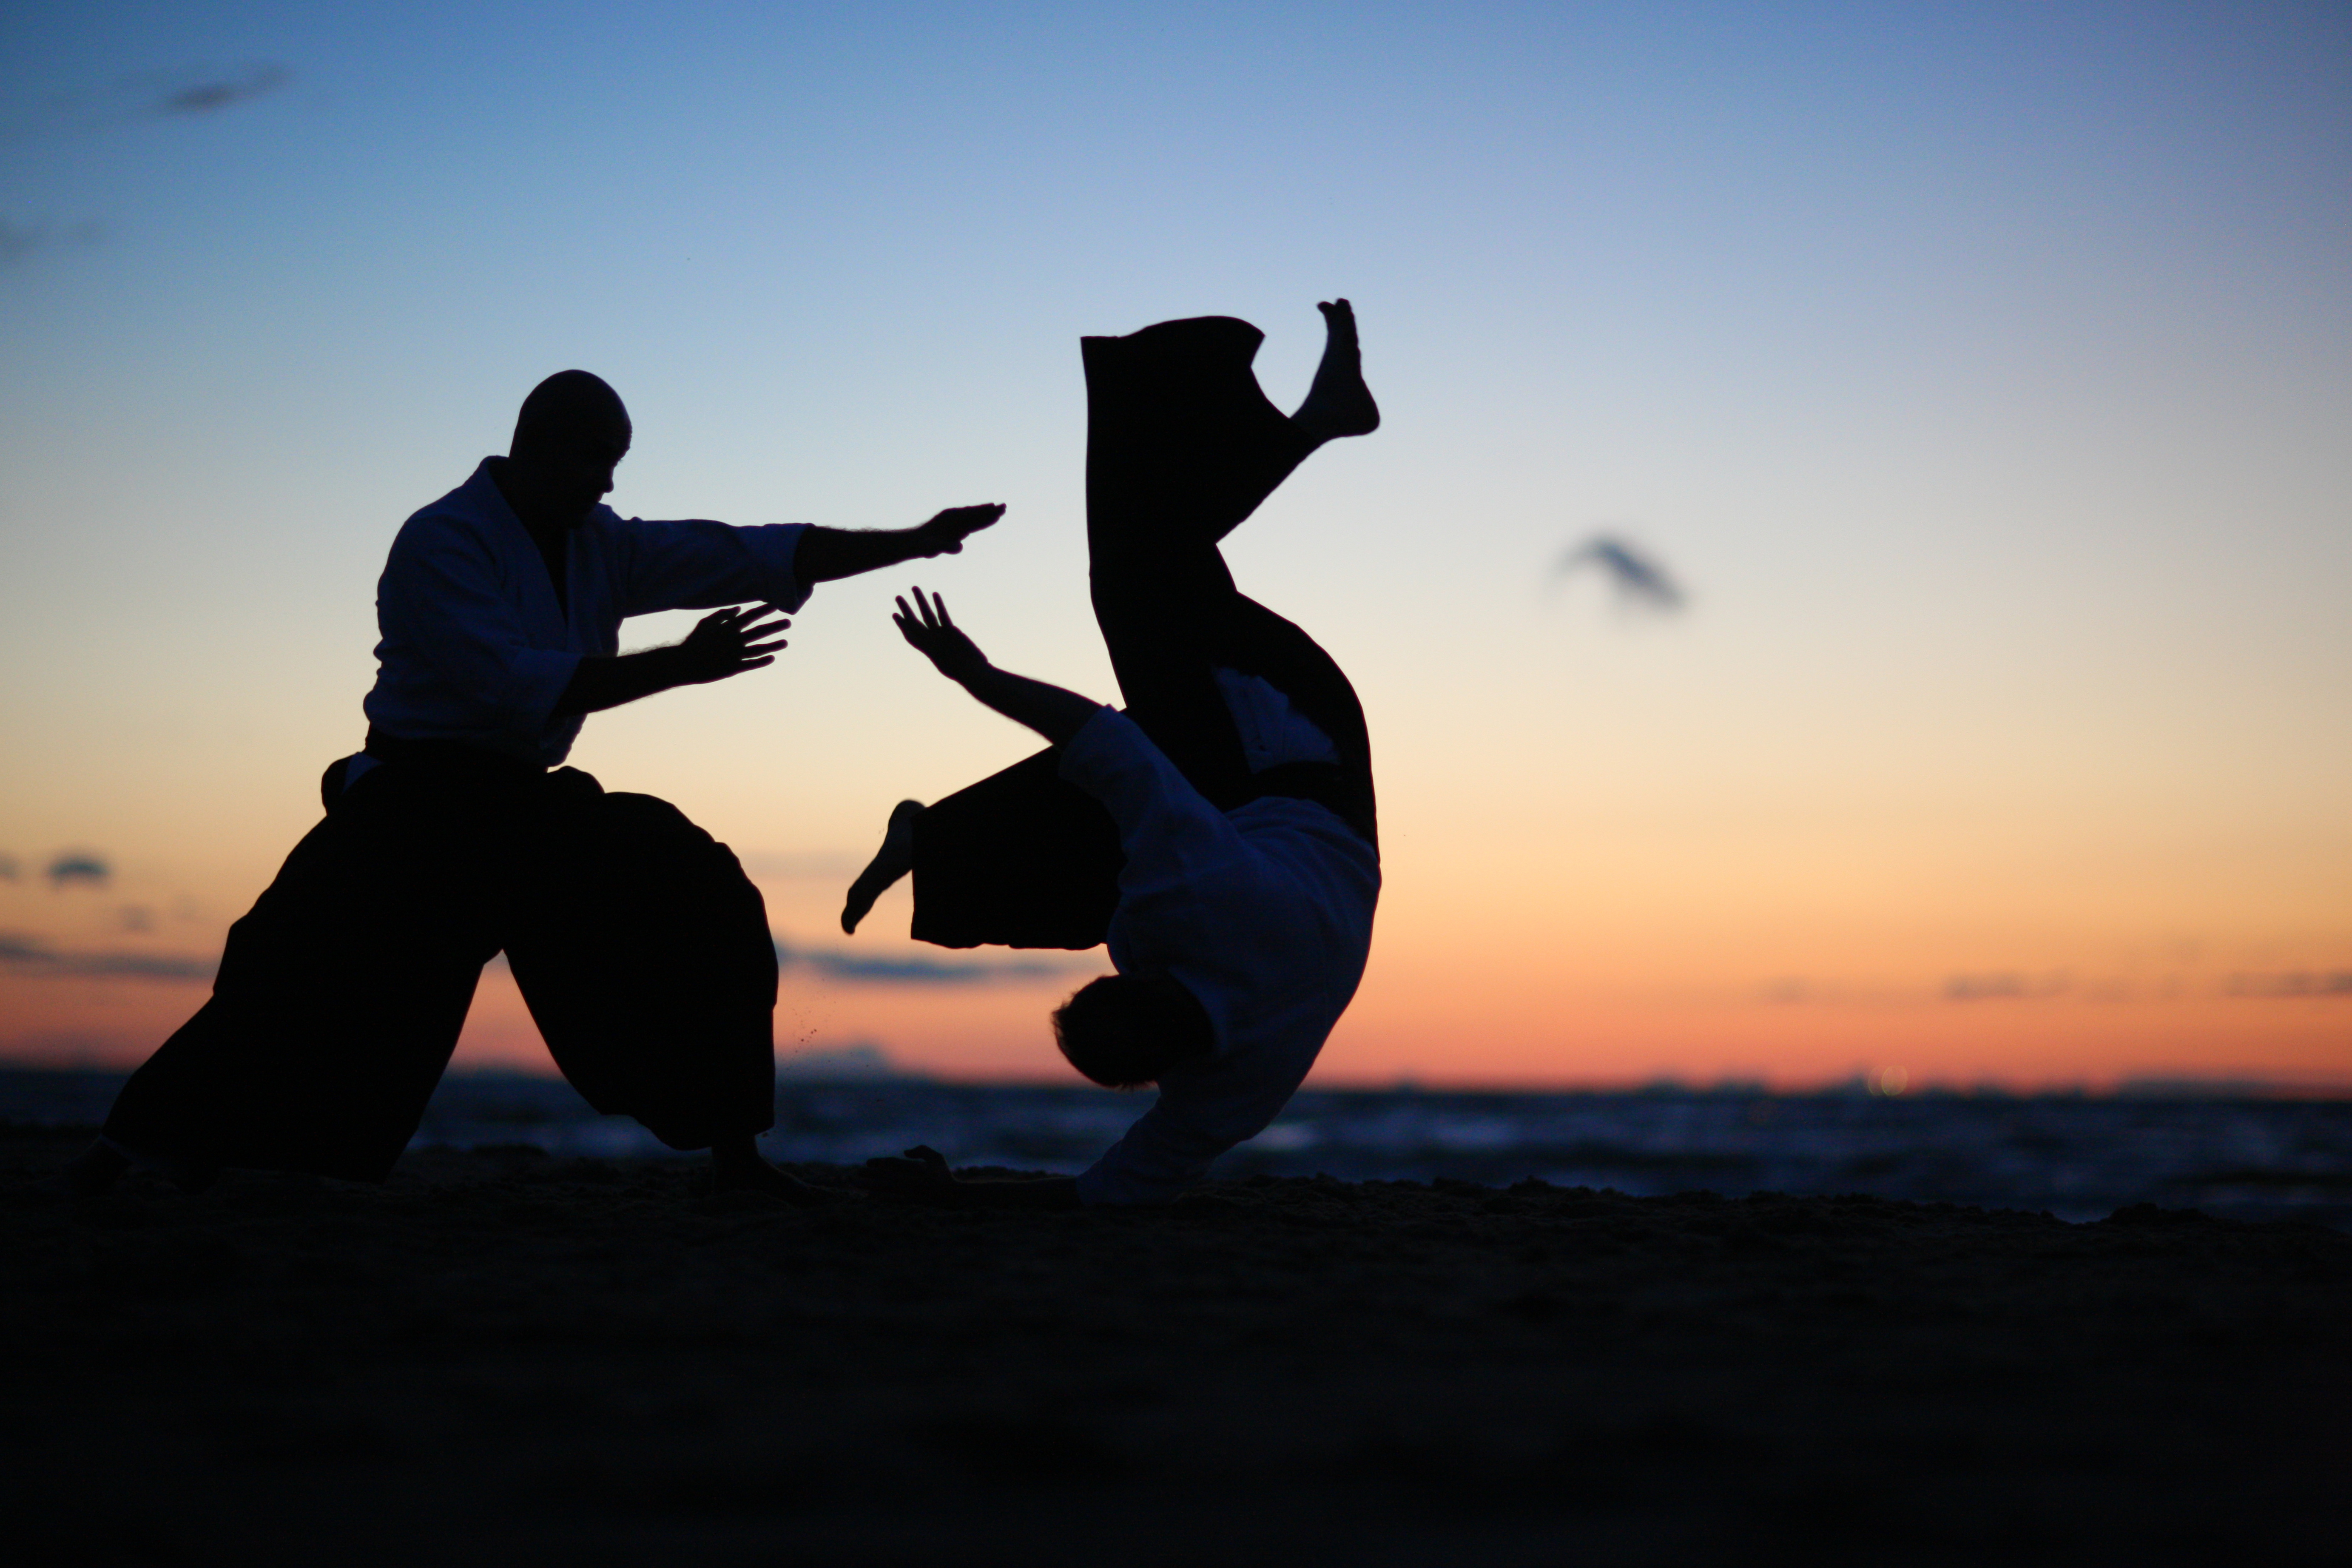 two individuals practicing aikido as the sun sets in the background